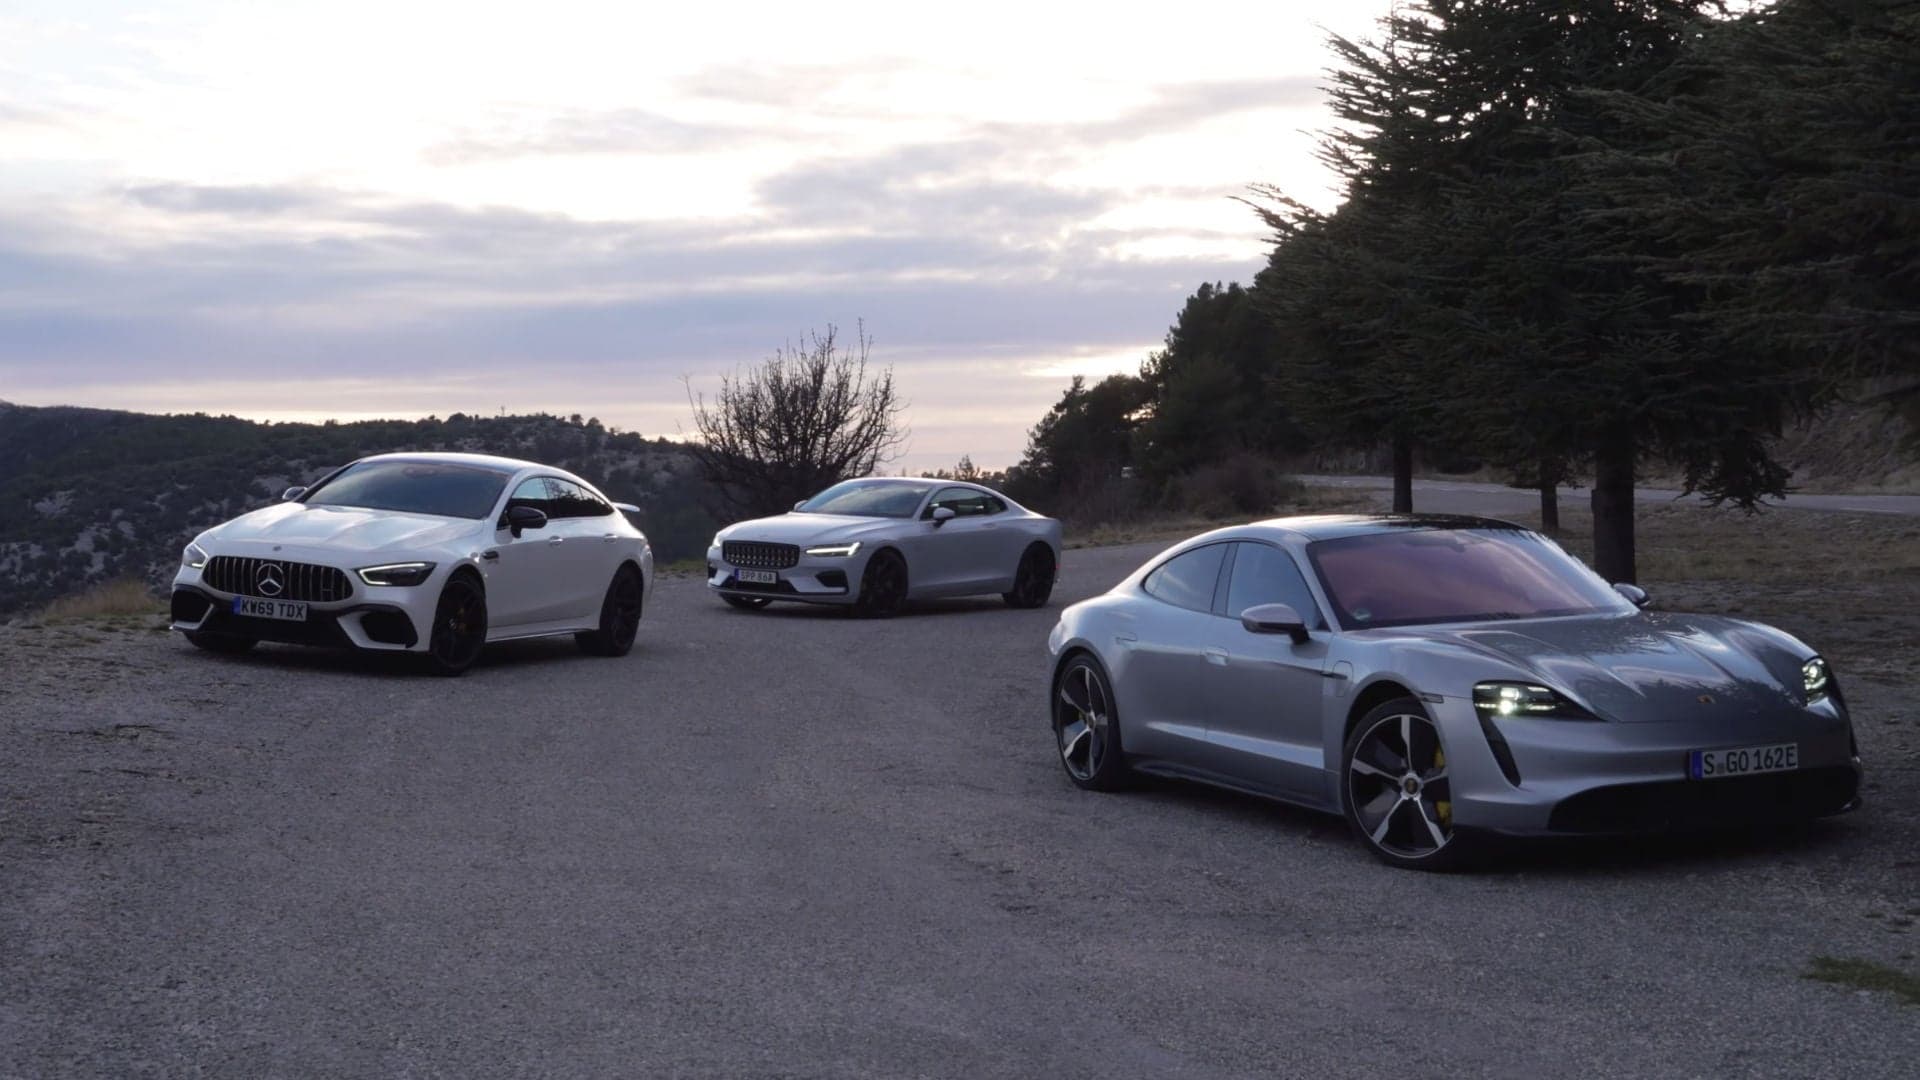 Gas vs Hybrid vs Electric Performance Car Showdown: Which One Wins in 2020?